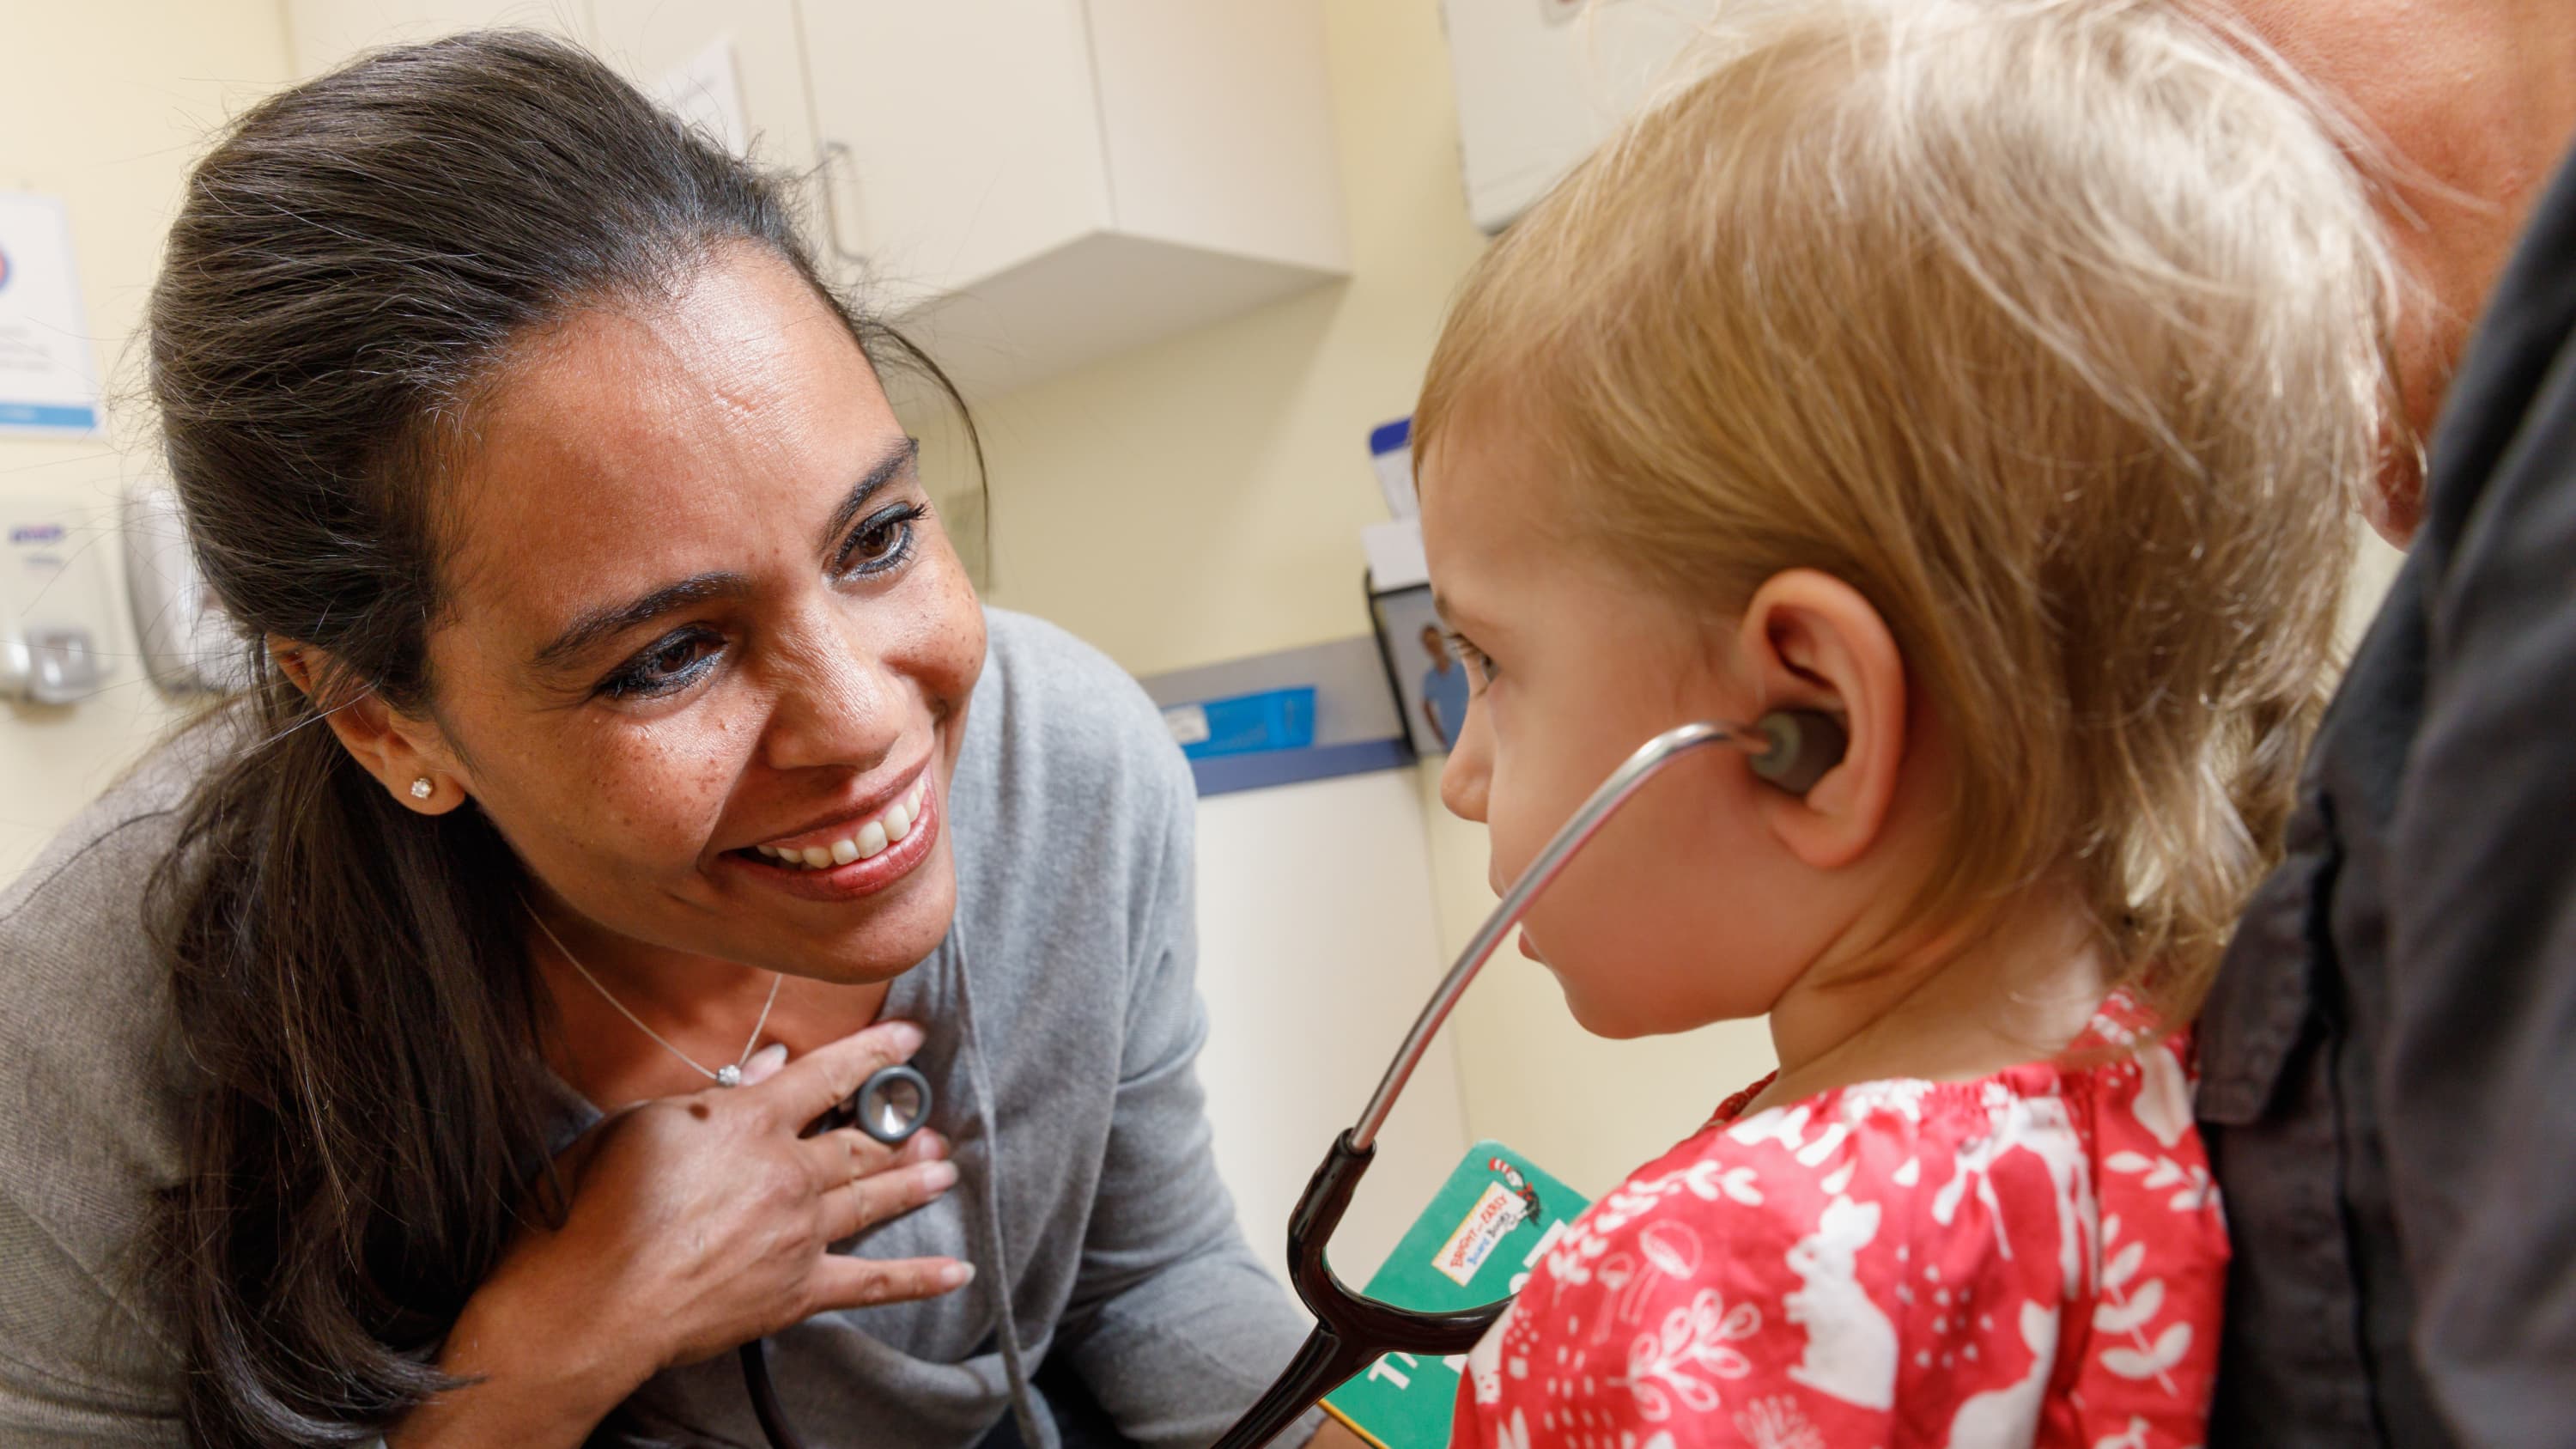 Dr. Annette Cameron is making a young patient feel comfortable by having her listen to her heartbeat using a stethoscope.